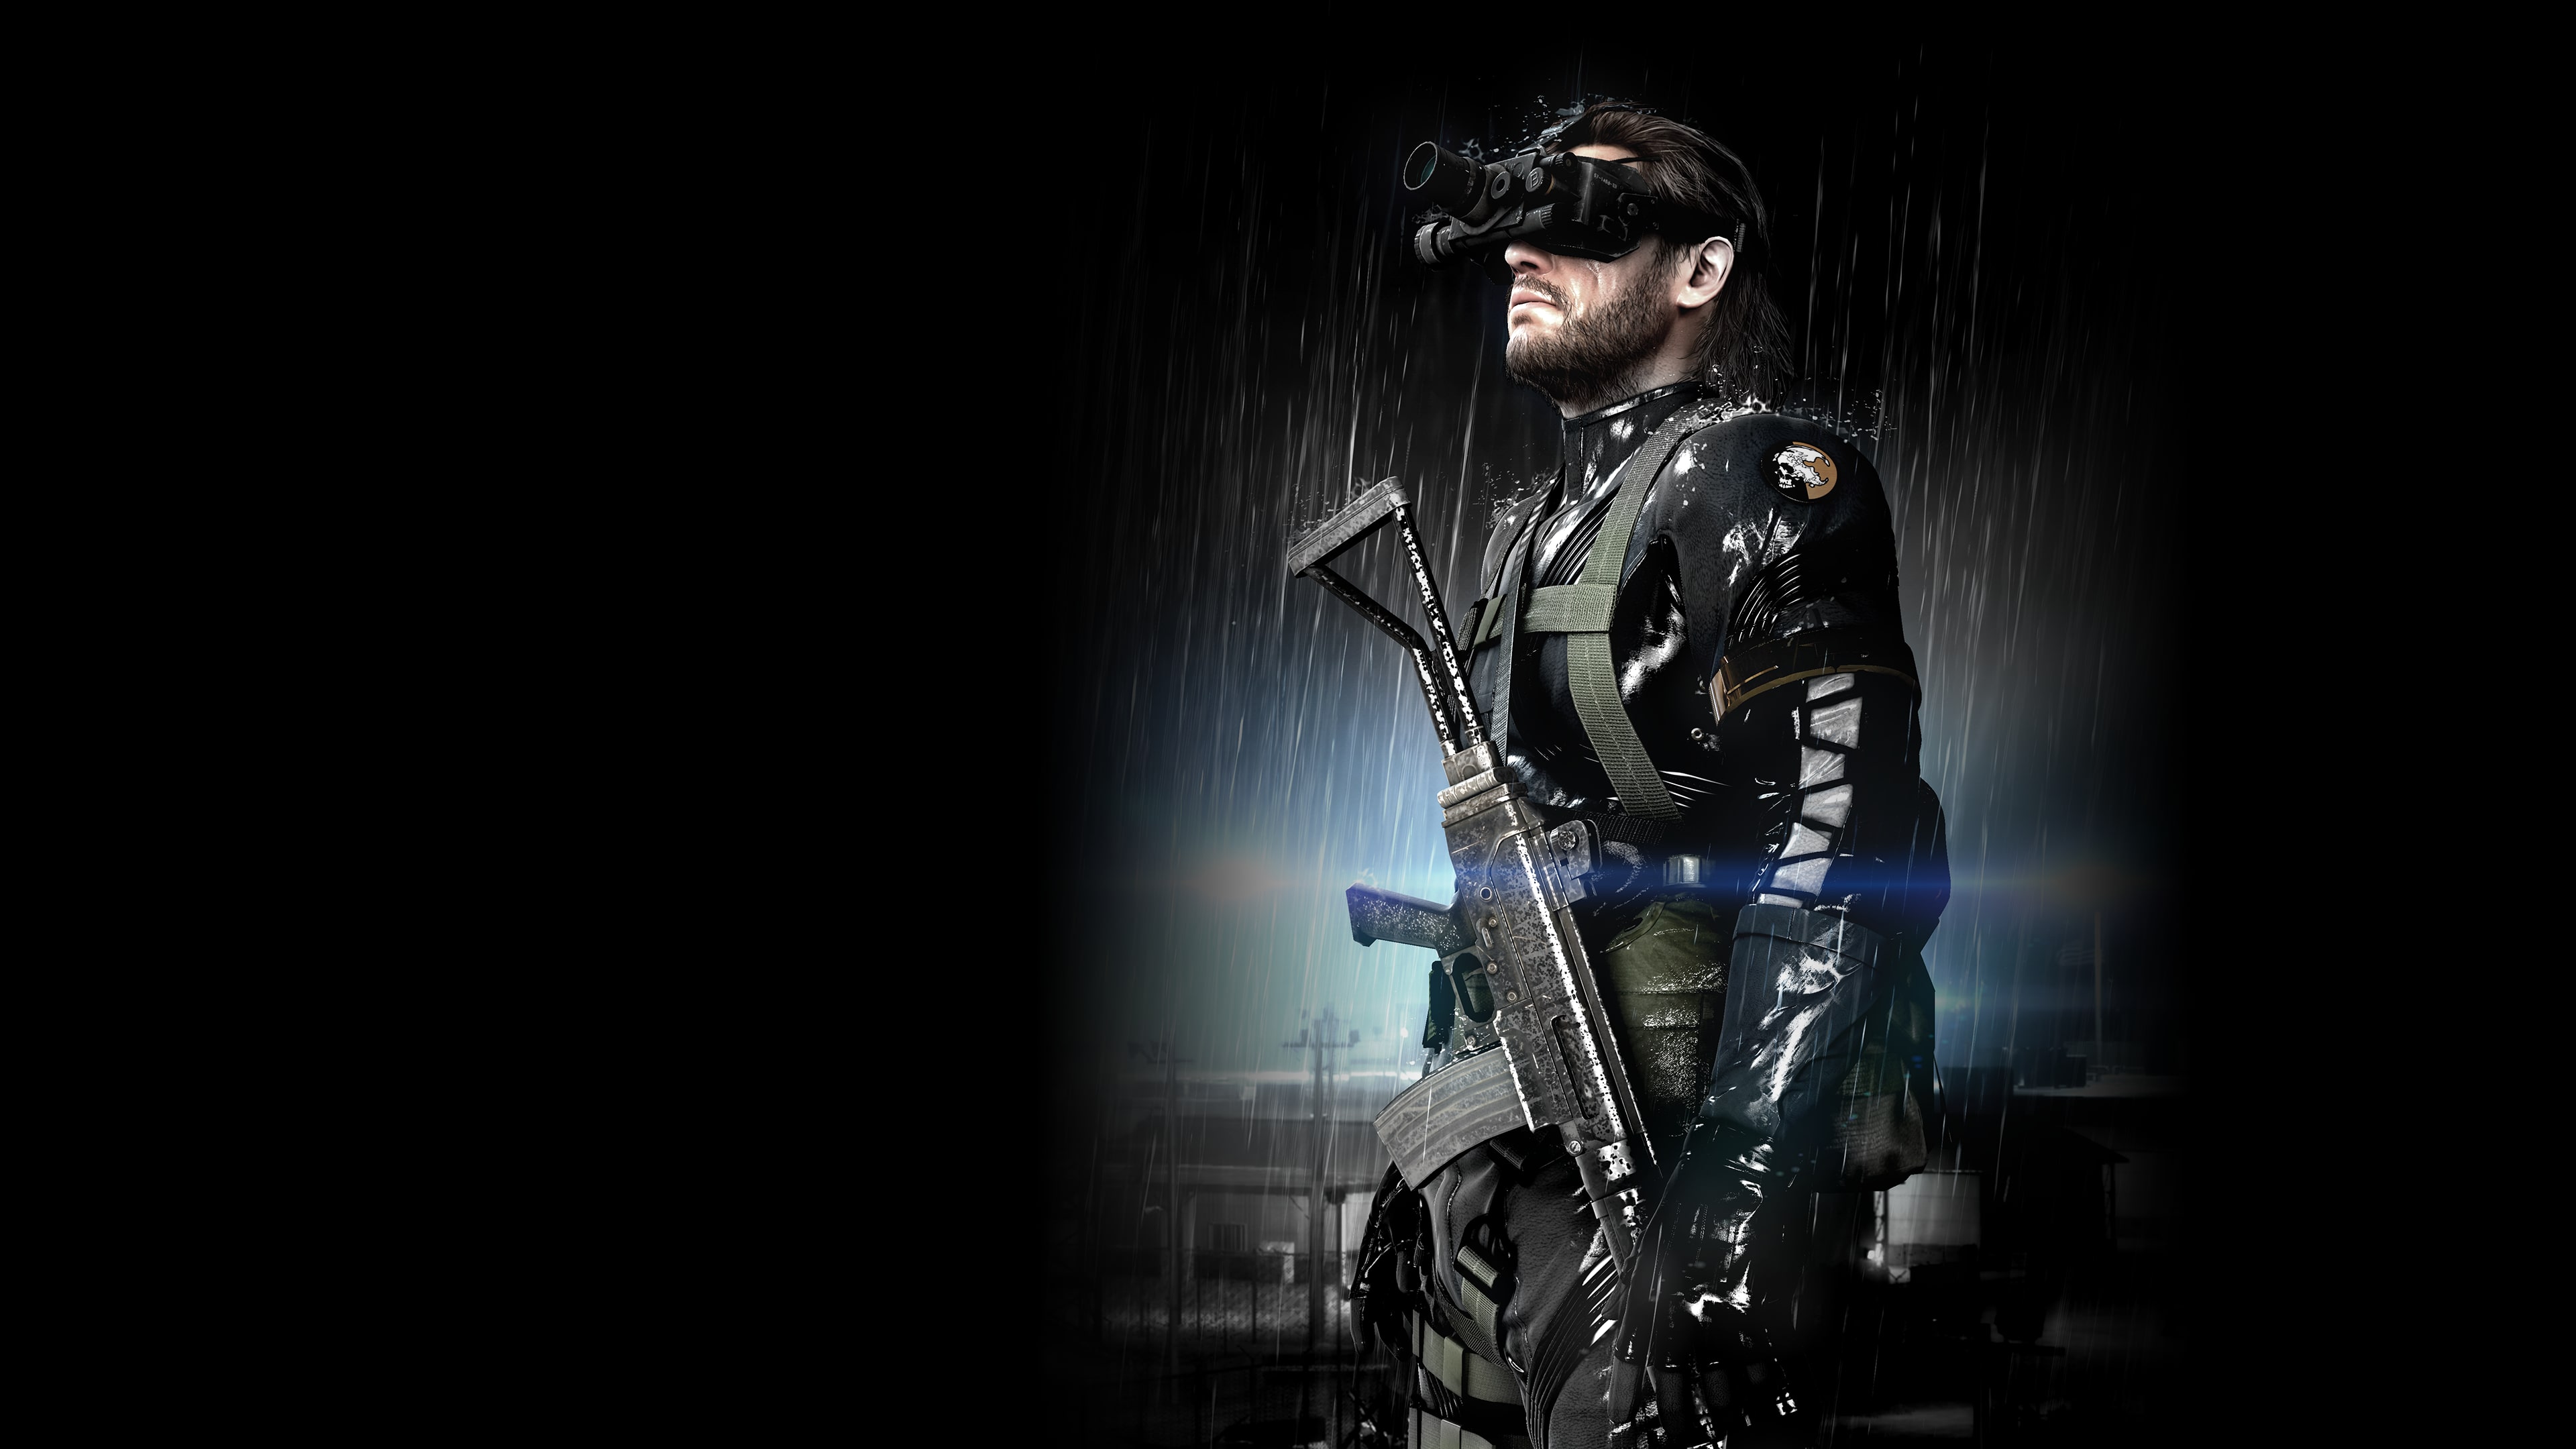 METAL GEAR SOLID V: GROUND ZEROES full game (English Ver.)